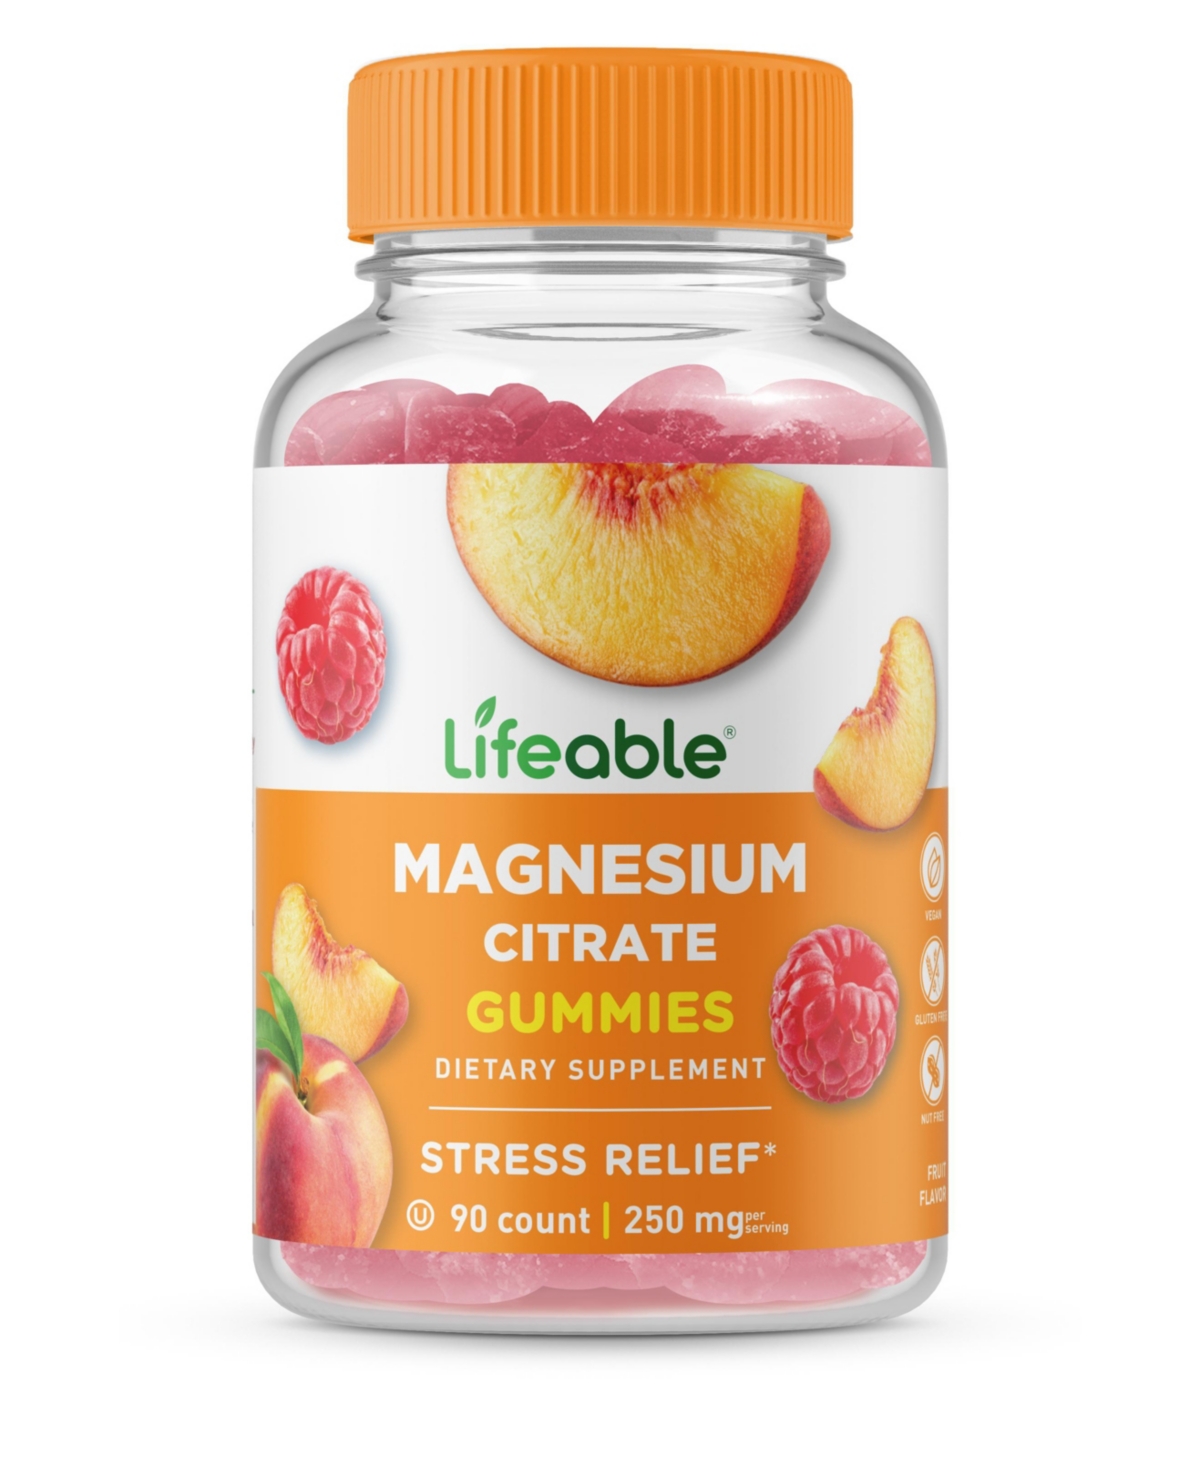 Extra Strength Magnesium Citrate Gummies - Muscle Relaxation - Great Tasting Natural Flavor, Dietary Supplement Vitamins - 90 Gummies - Open